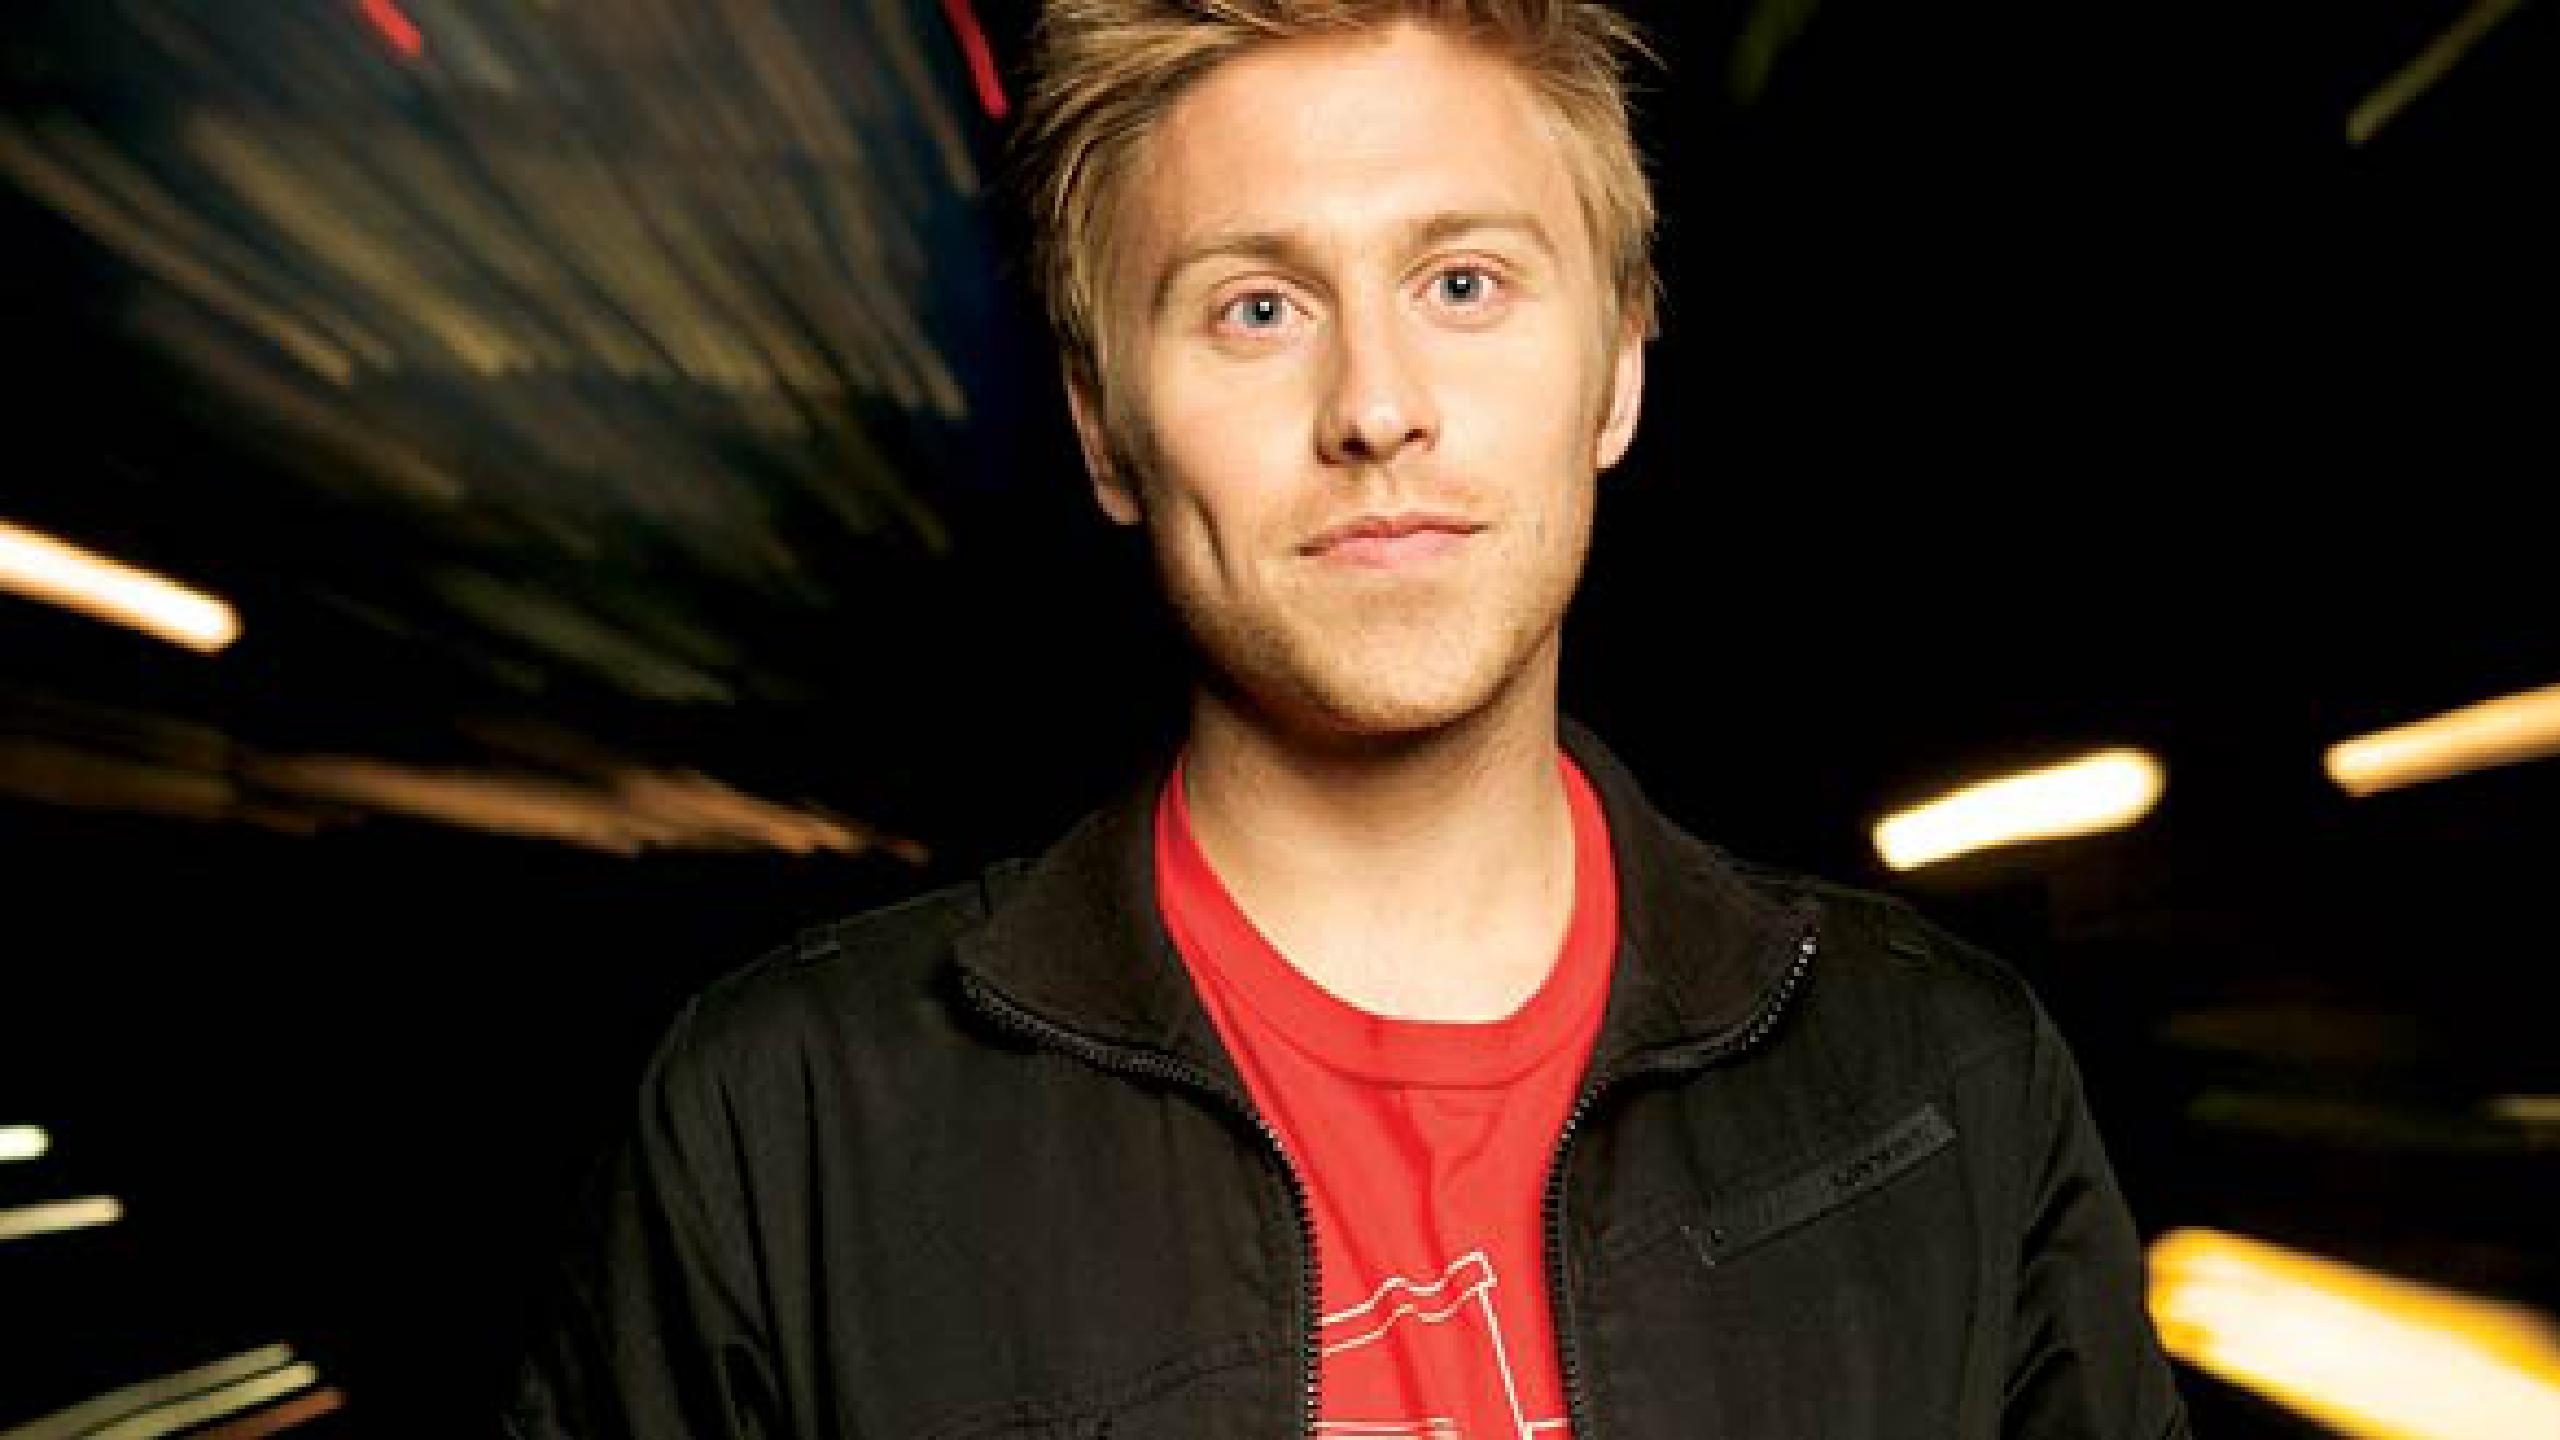 russell howard tour age restriction